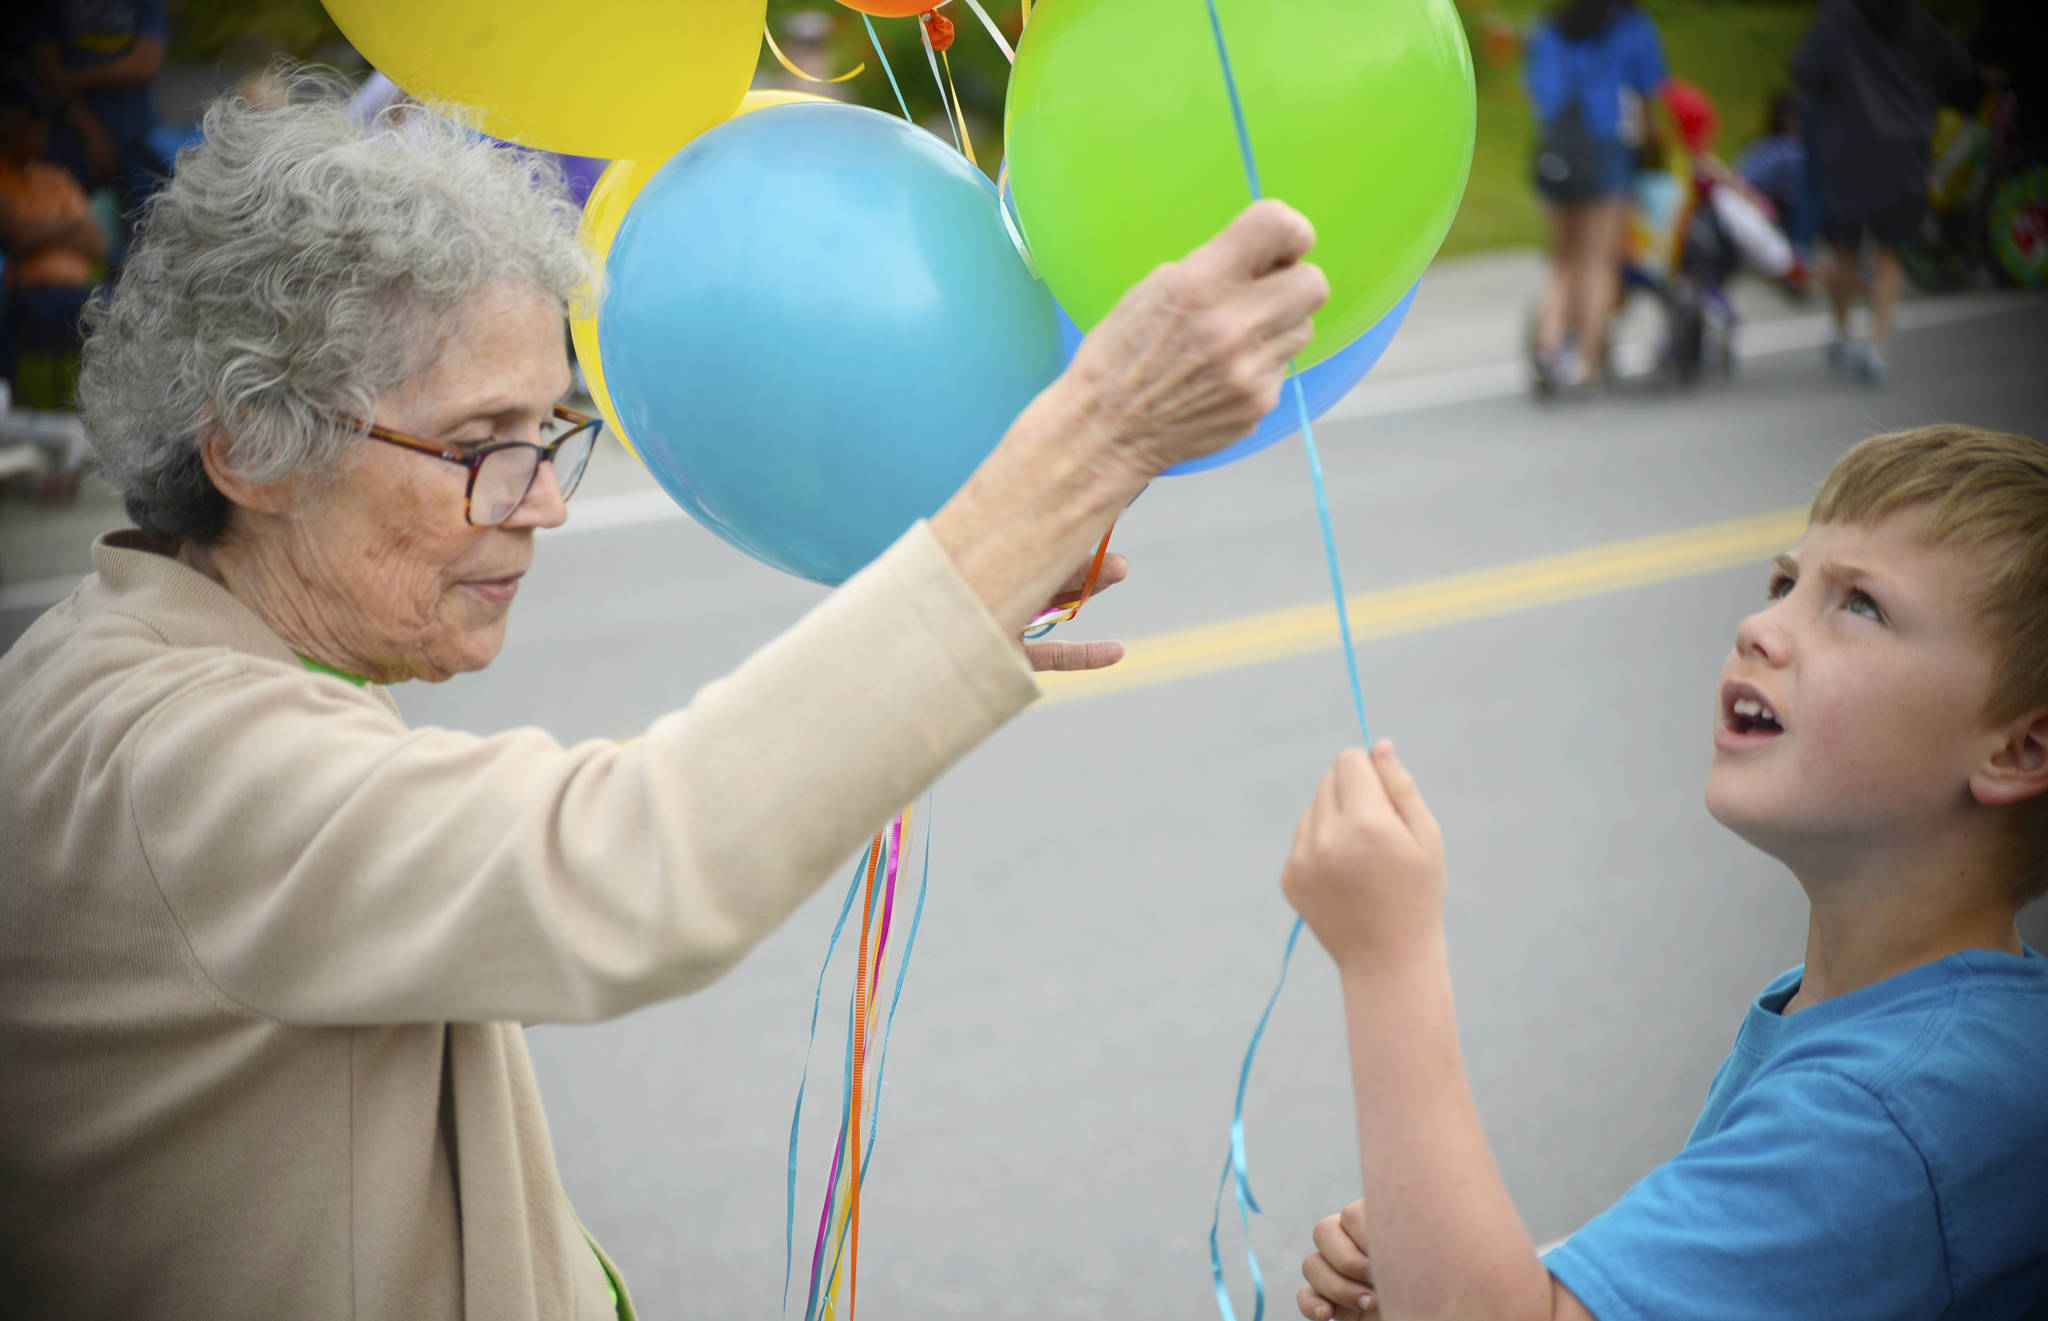 A volunteer in Heritage Place’s entry in the Progress Days parade hands a balloon to a young spectator on Marydale Avenue on Saturday, July 28, 2018 in Soldotna, Alaska. The parade kicks off the weekend-long event celebrating Soldotna’s history, with a market on Saturday and Sunday in Soldotna Creek Park and a concert Saturday night followed by a free community barbecue Sunday. (Photo by Elizabeth Earl/Peninsula Clarion)